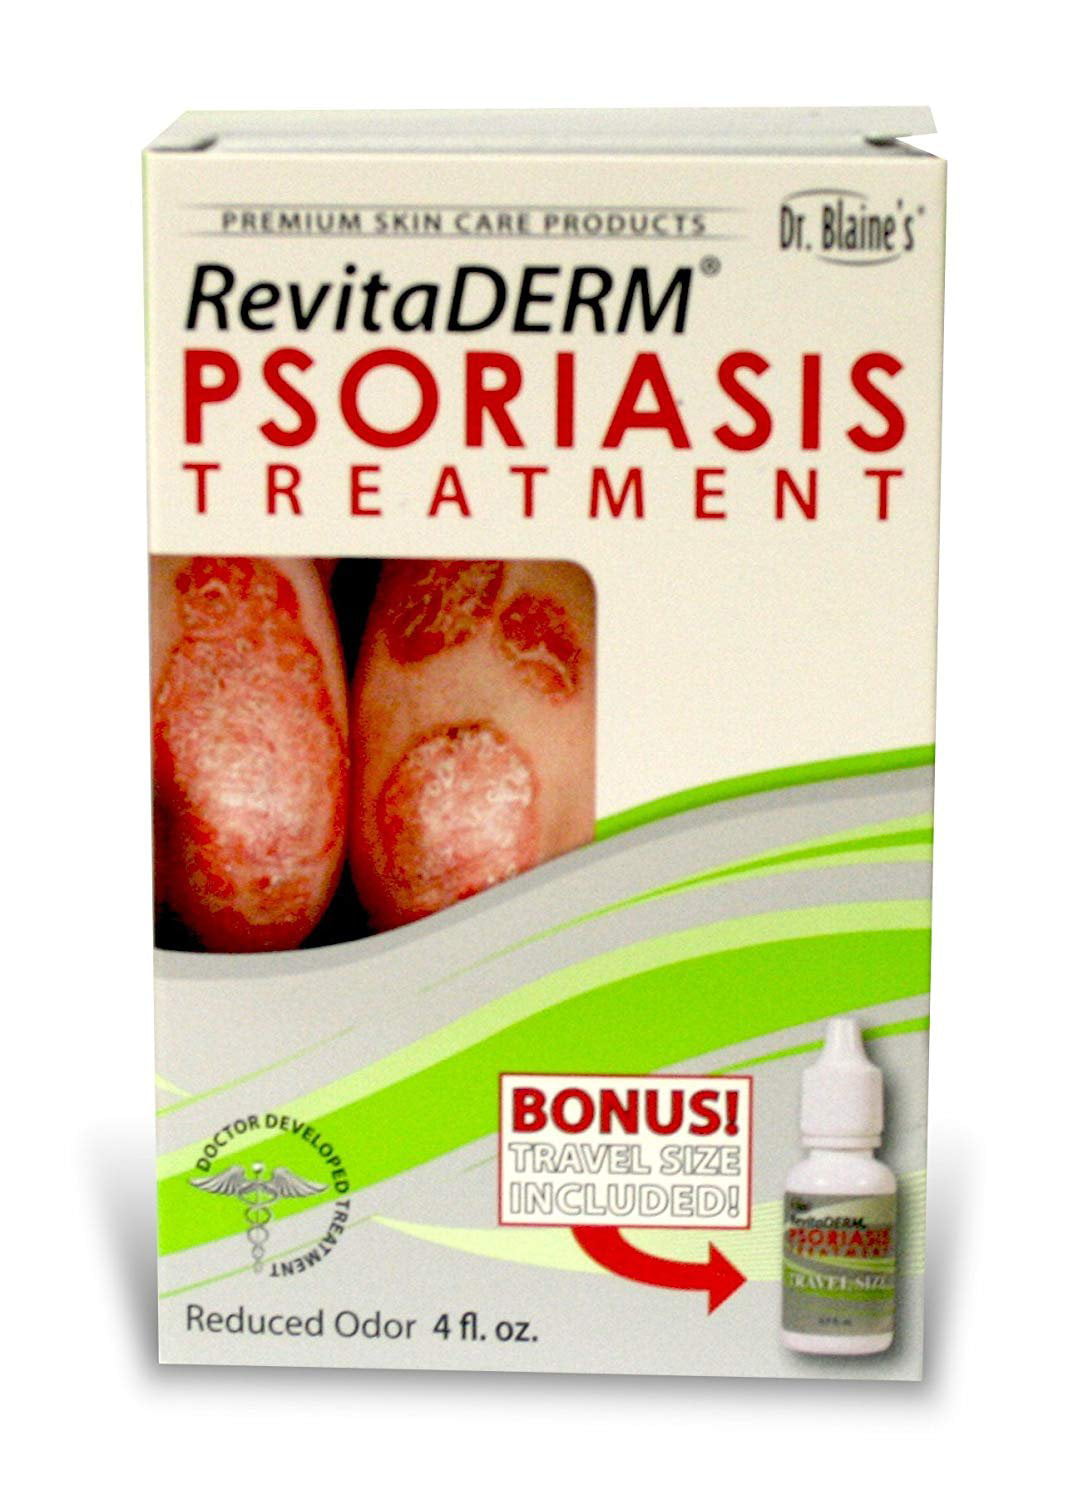 over the counter psoriasis treatment at walmart